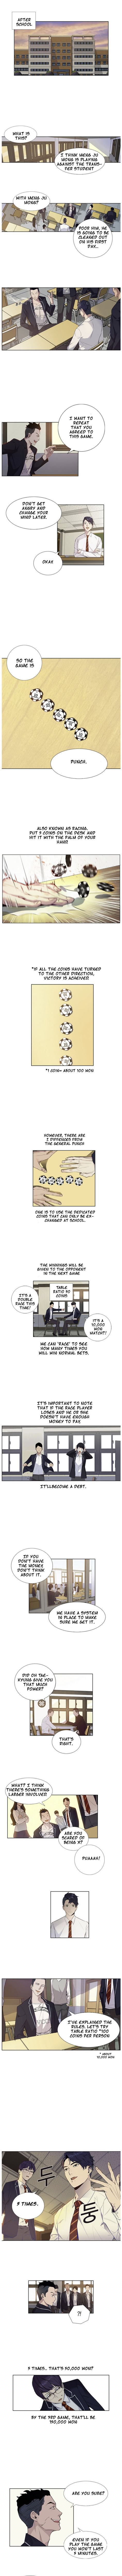 The World Is Money and Power - Chapter 1 Page 8